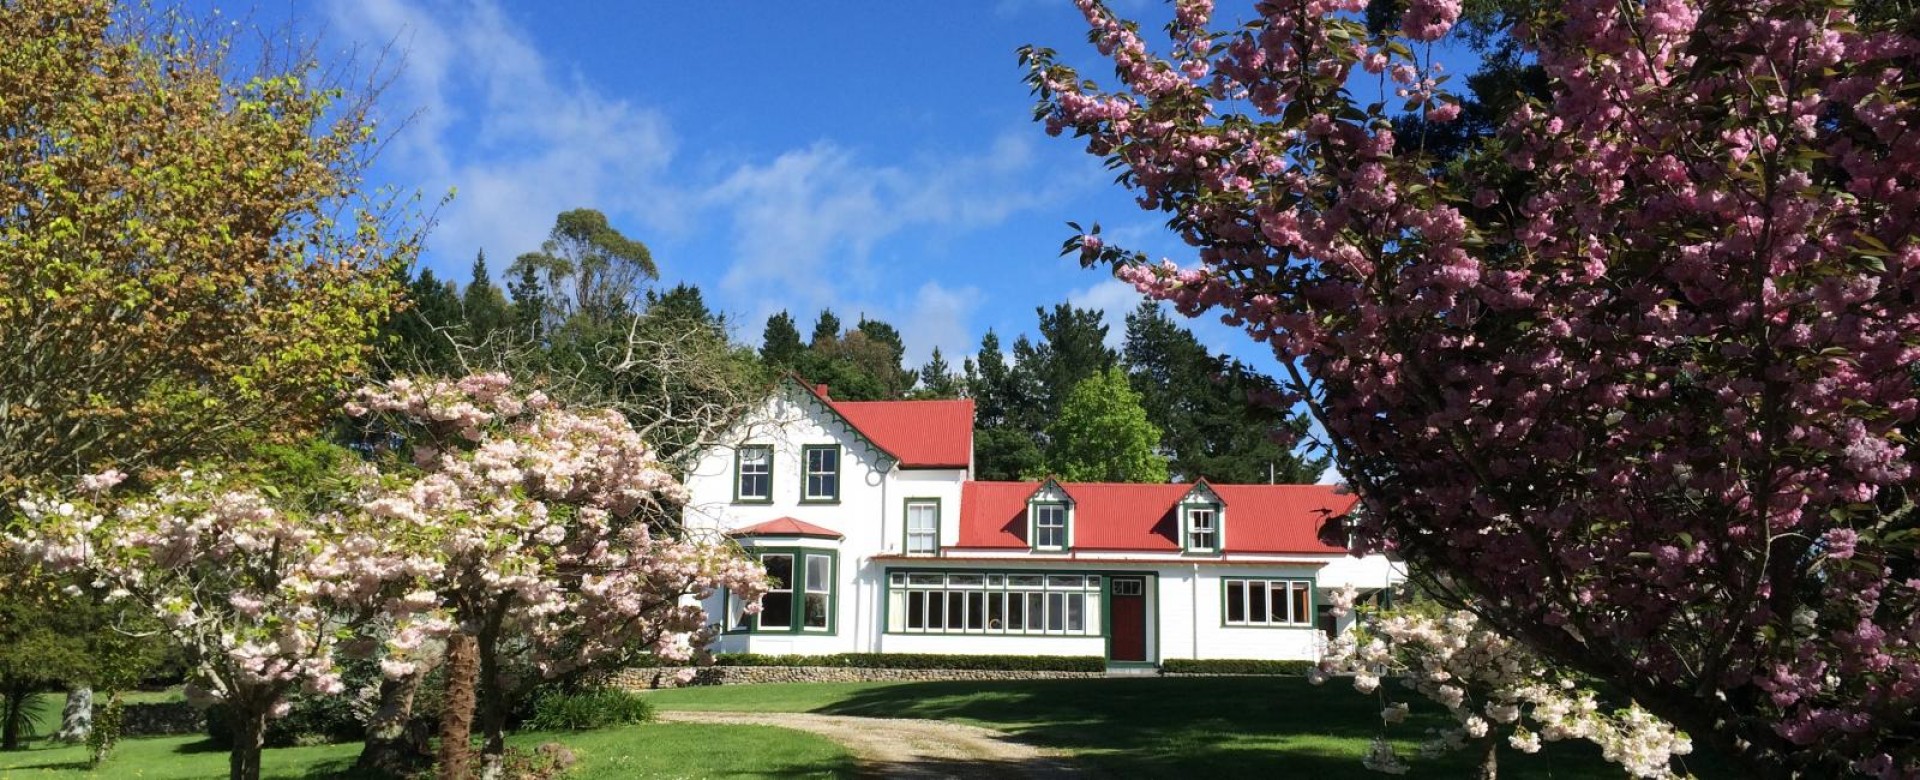 Hawkes Bay Plus - Fine Hospitality and Heritage Homesteads